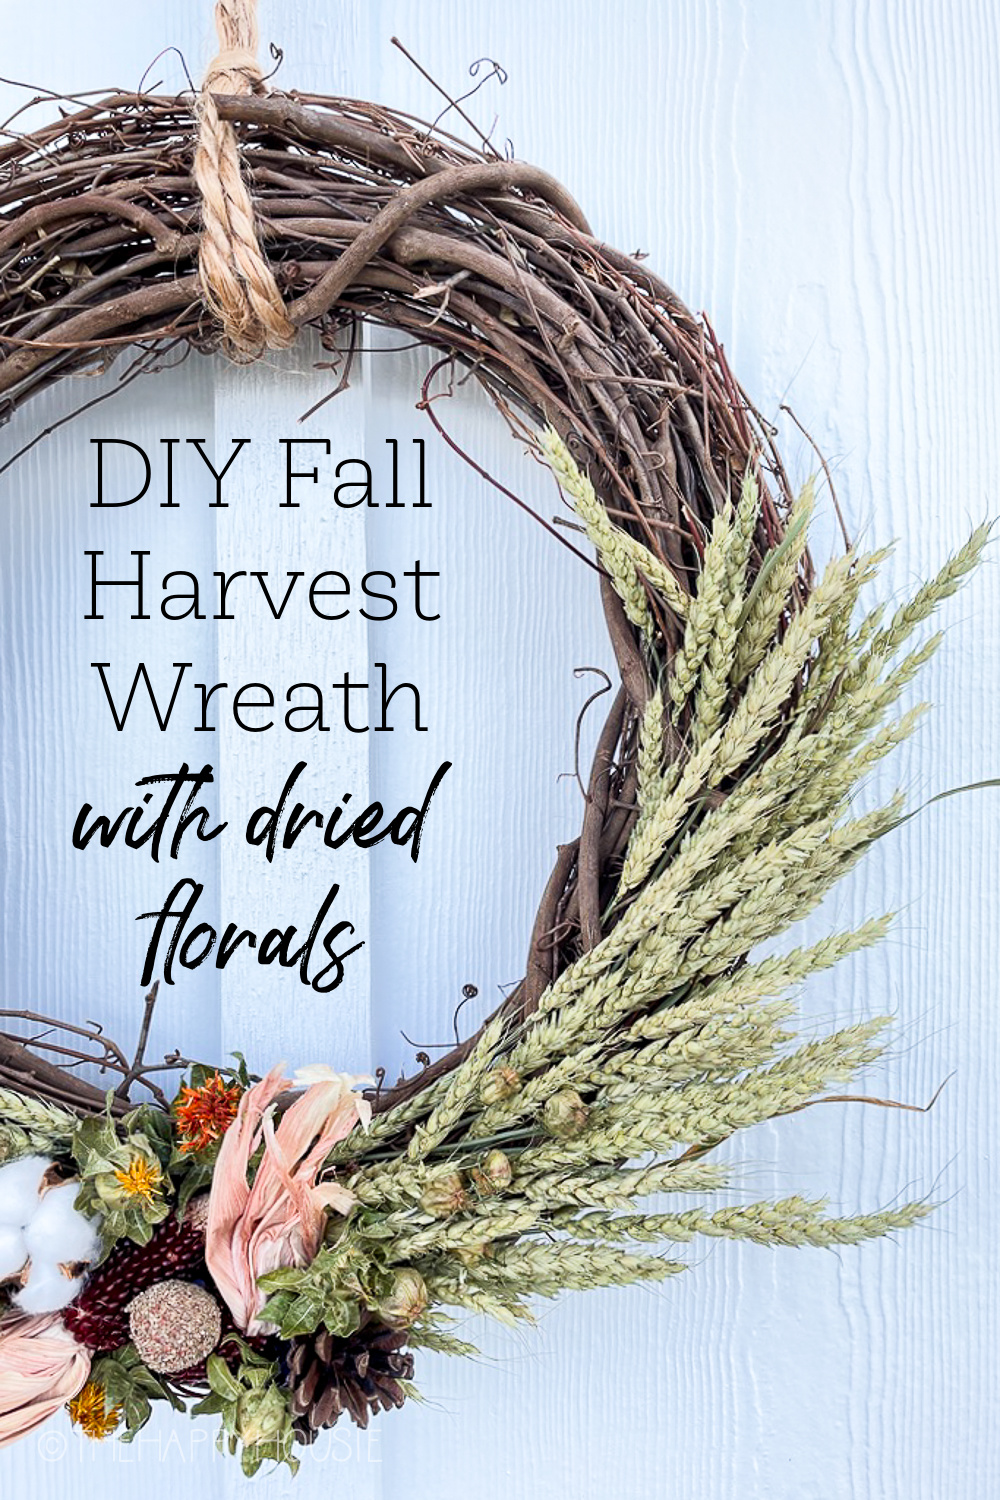 DIY Fall Harvest Wreath With Dried florals graphic.